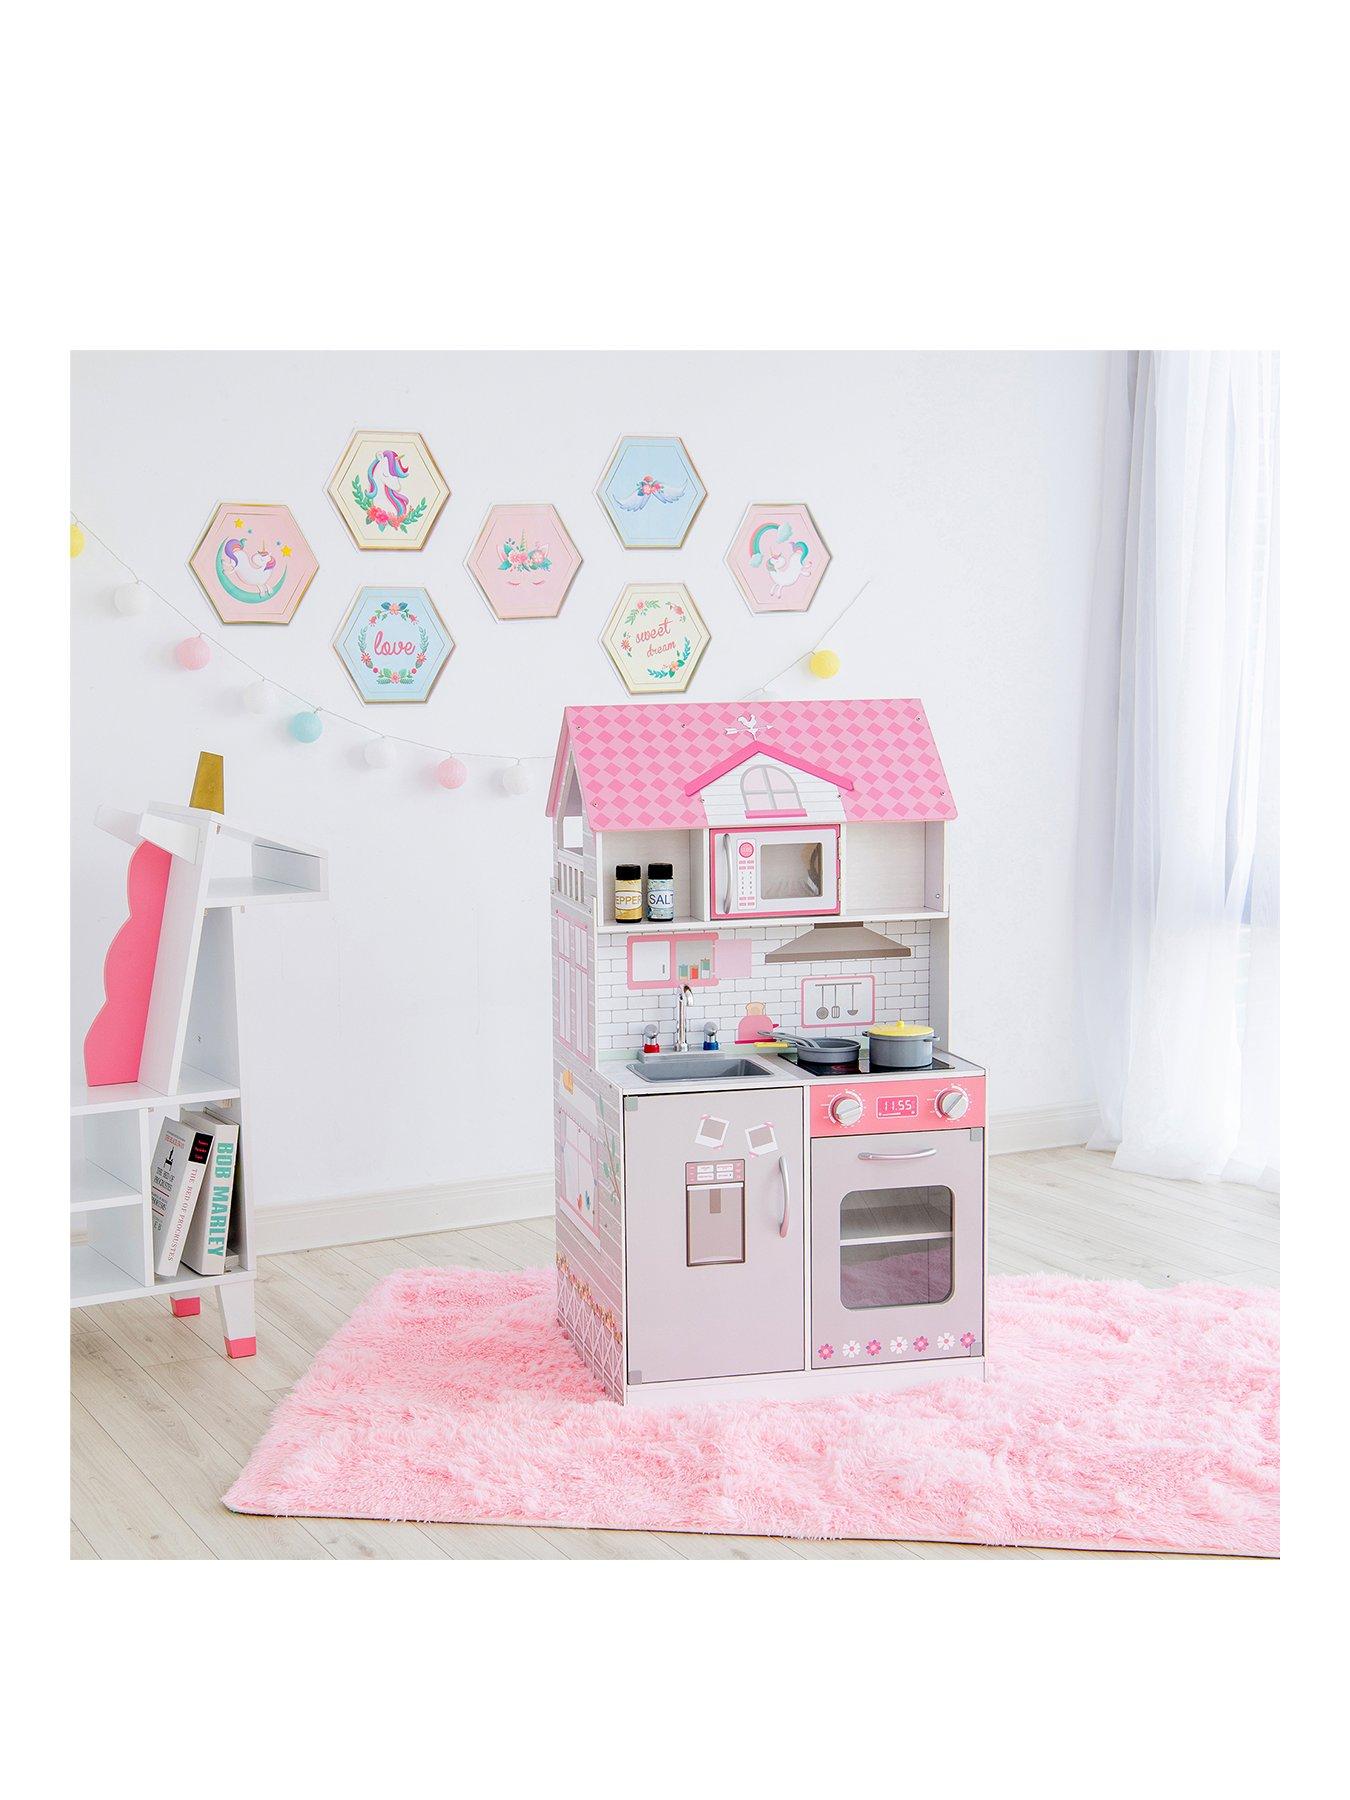 Details about   Doll House Furniture For Barbie Sofa Chair Food Trolley Rack Mirror Slide Hoover 